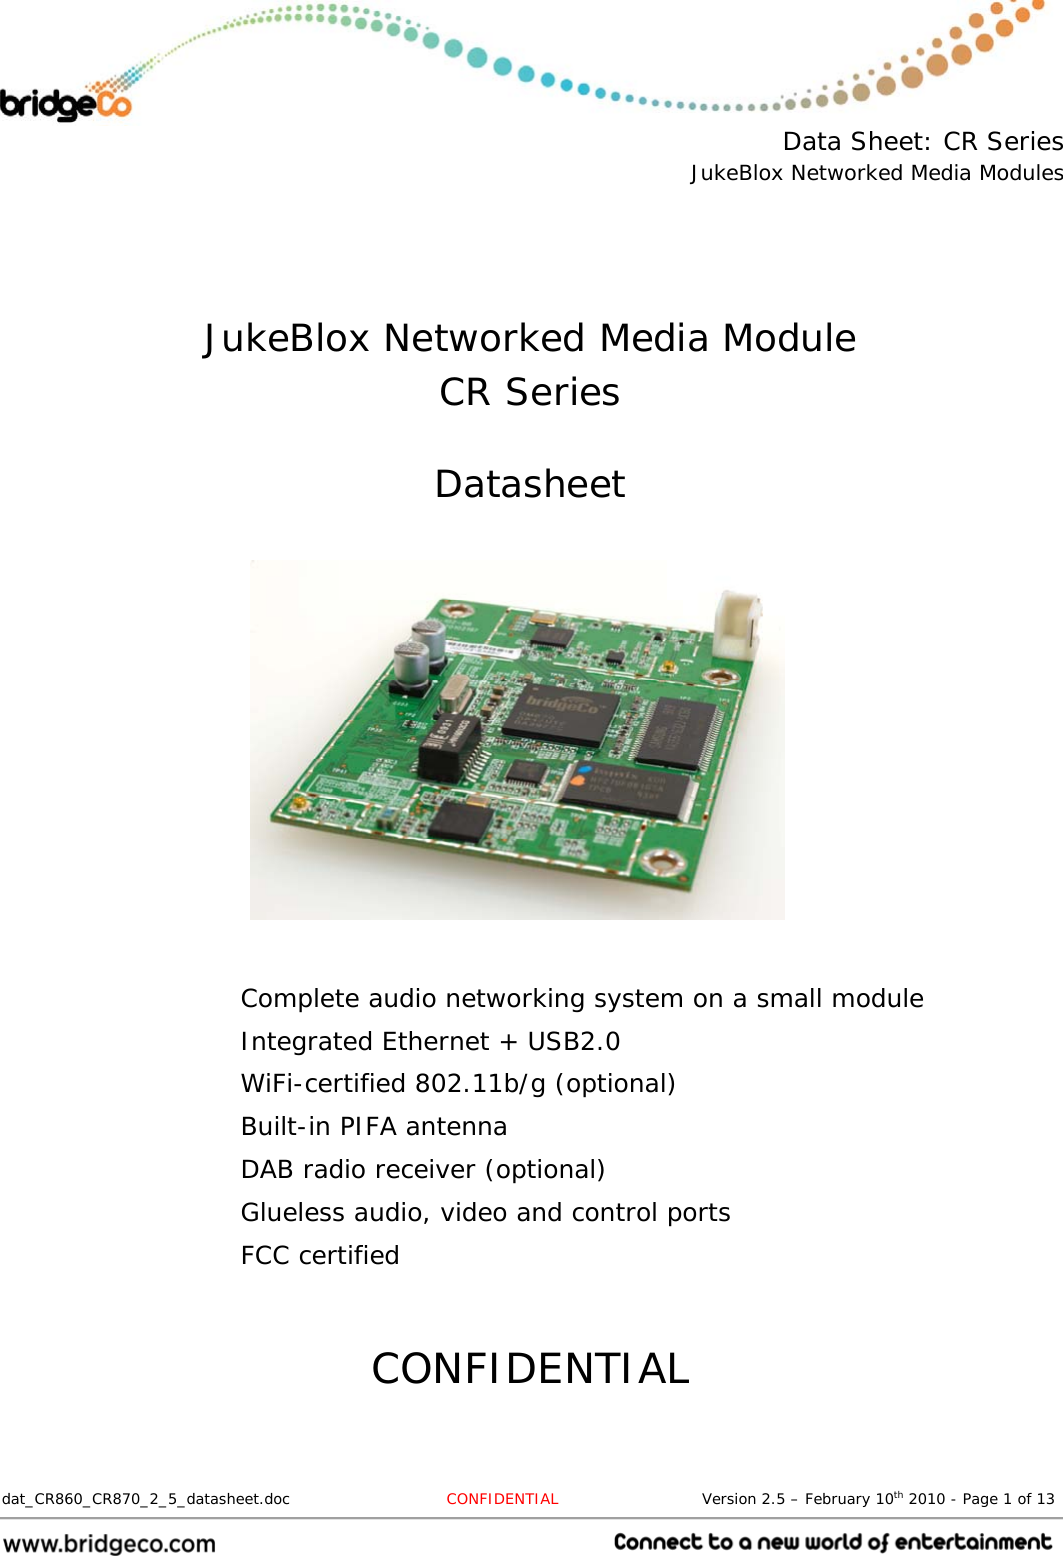  Data Sheet: CR Series JukeBlox Networked Media Modules  dat_CR860_CR870_2_5_datasheet.doc  CONFIDENTIAL                            Version 2.5 – February 10th 2010 - Page 1 of 13                                    JukeBlox Networked Media Module CR Series  Datasheet           Complete audio networking system on a small module Integrated Ethernet + USB2.0 WiFi-certified 802.11b/g (optional) Built-in PIFA antenna DAB radio receiver (optional) Glueless audio, video and control ports FCC certified   CONFIDENTIAL 